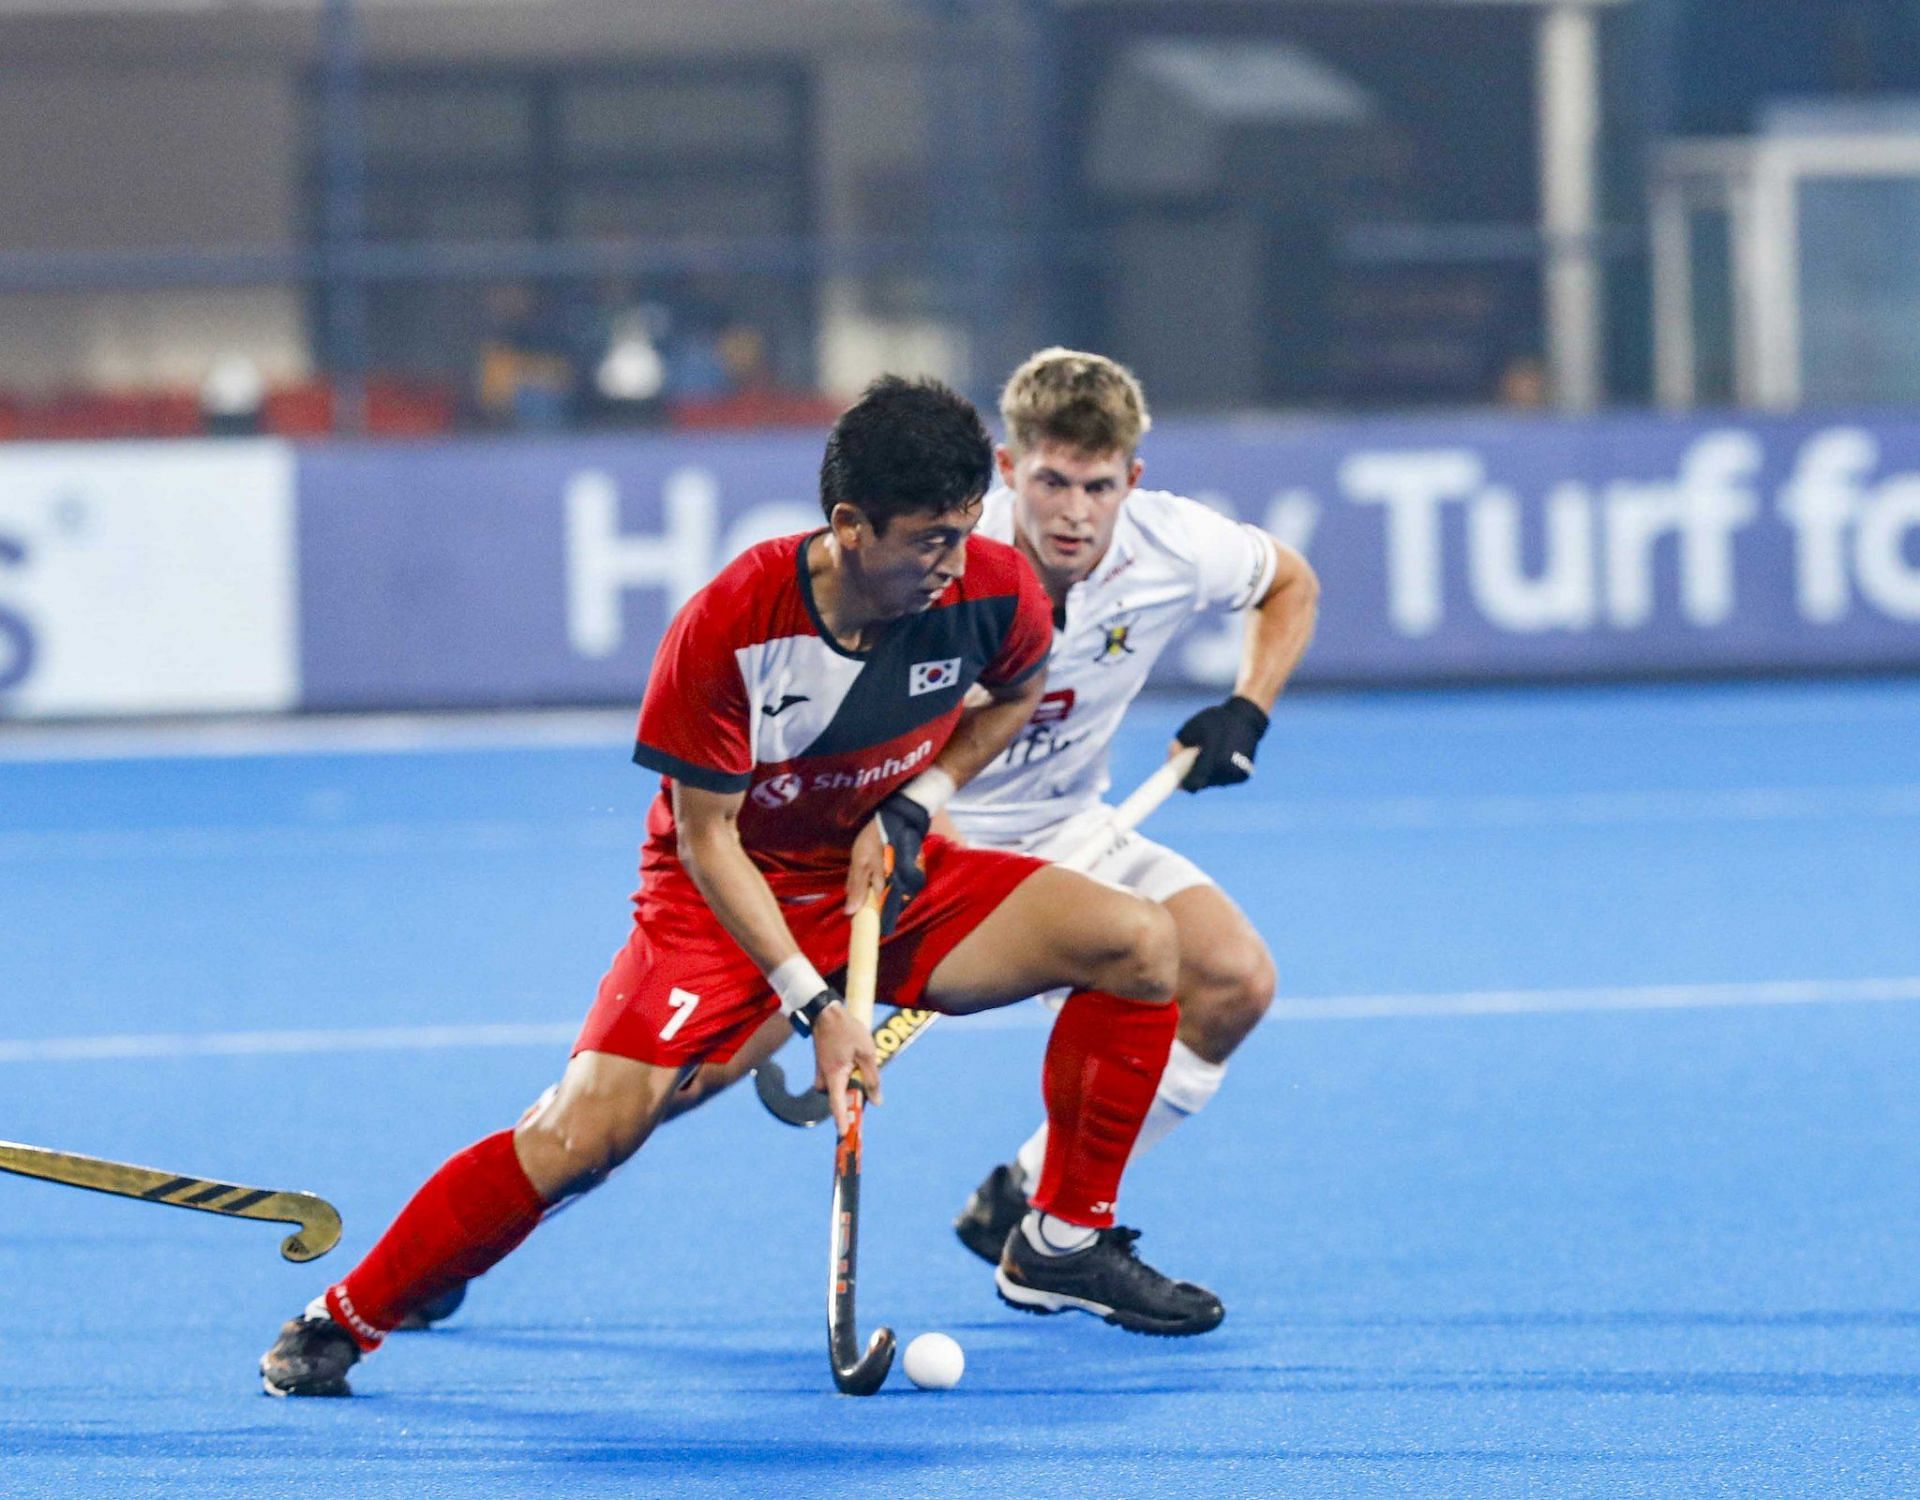 Belgium and Korea teams in action in an earlier match (Image Courtesy: Twitter/Hockey India)